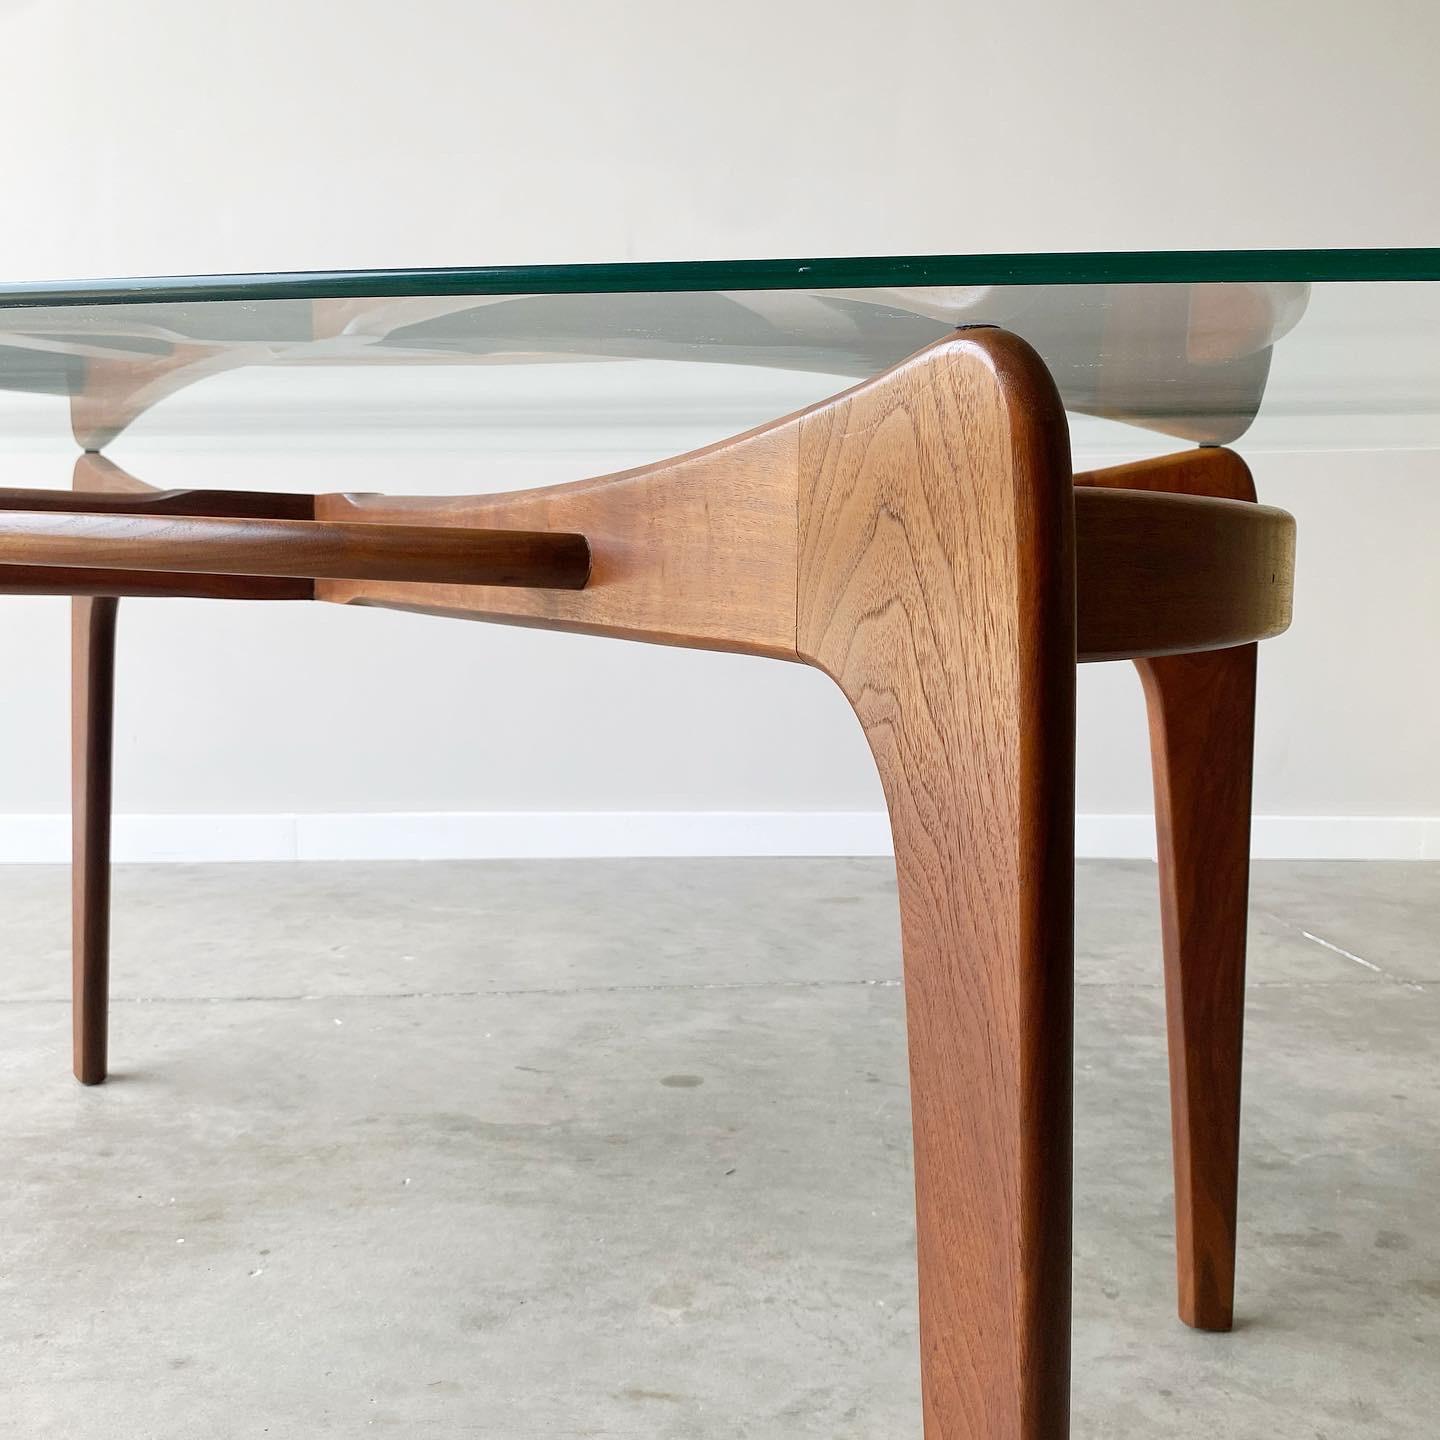 An incredible sculpted walnut base with original glass top. Classic mid century styling from Adrian Pearsall.

Measures 71” by 38.5”, 29” high.  

surface scratches to glass and one small chip.  